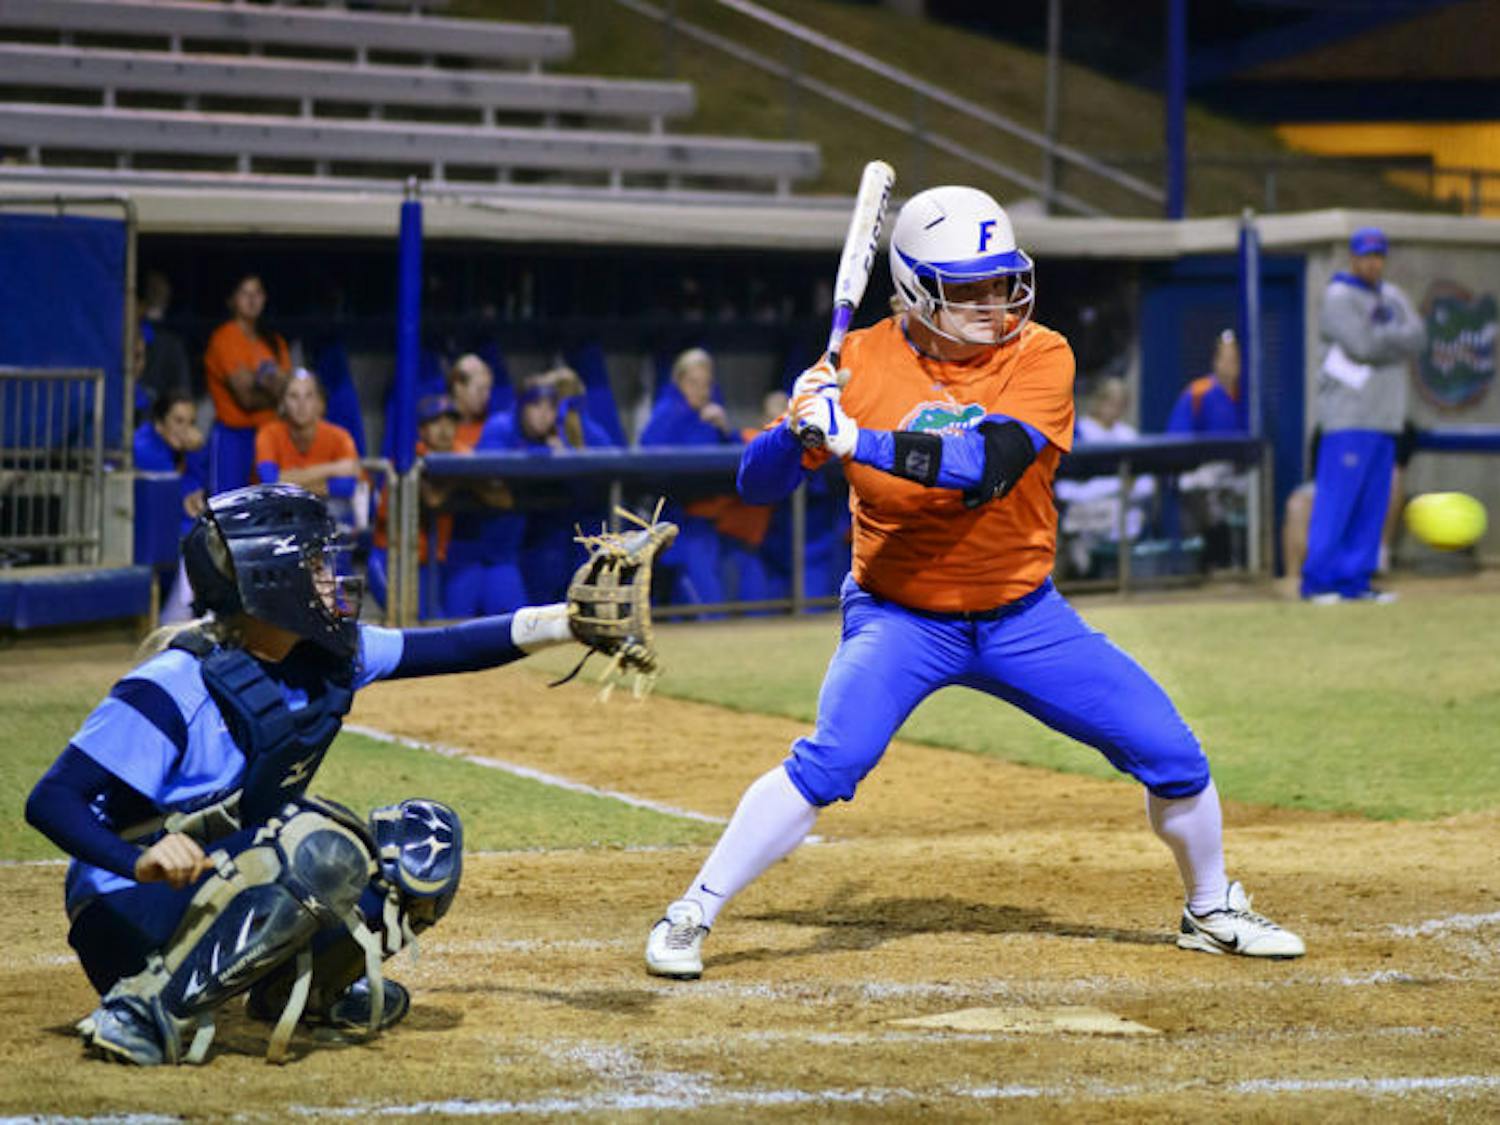 Bailey Castro bats during an exhibition against Santa Fe on Nov. 7, 2012, at Katie Seashole Pressly Stadium. Castro struck out in a key spot in Florida's 7-3 win against Florida State on Wednesday.